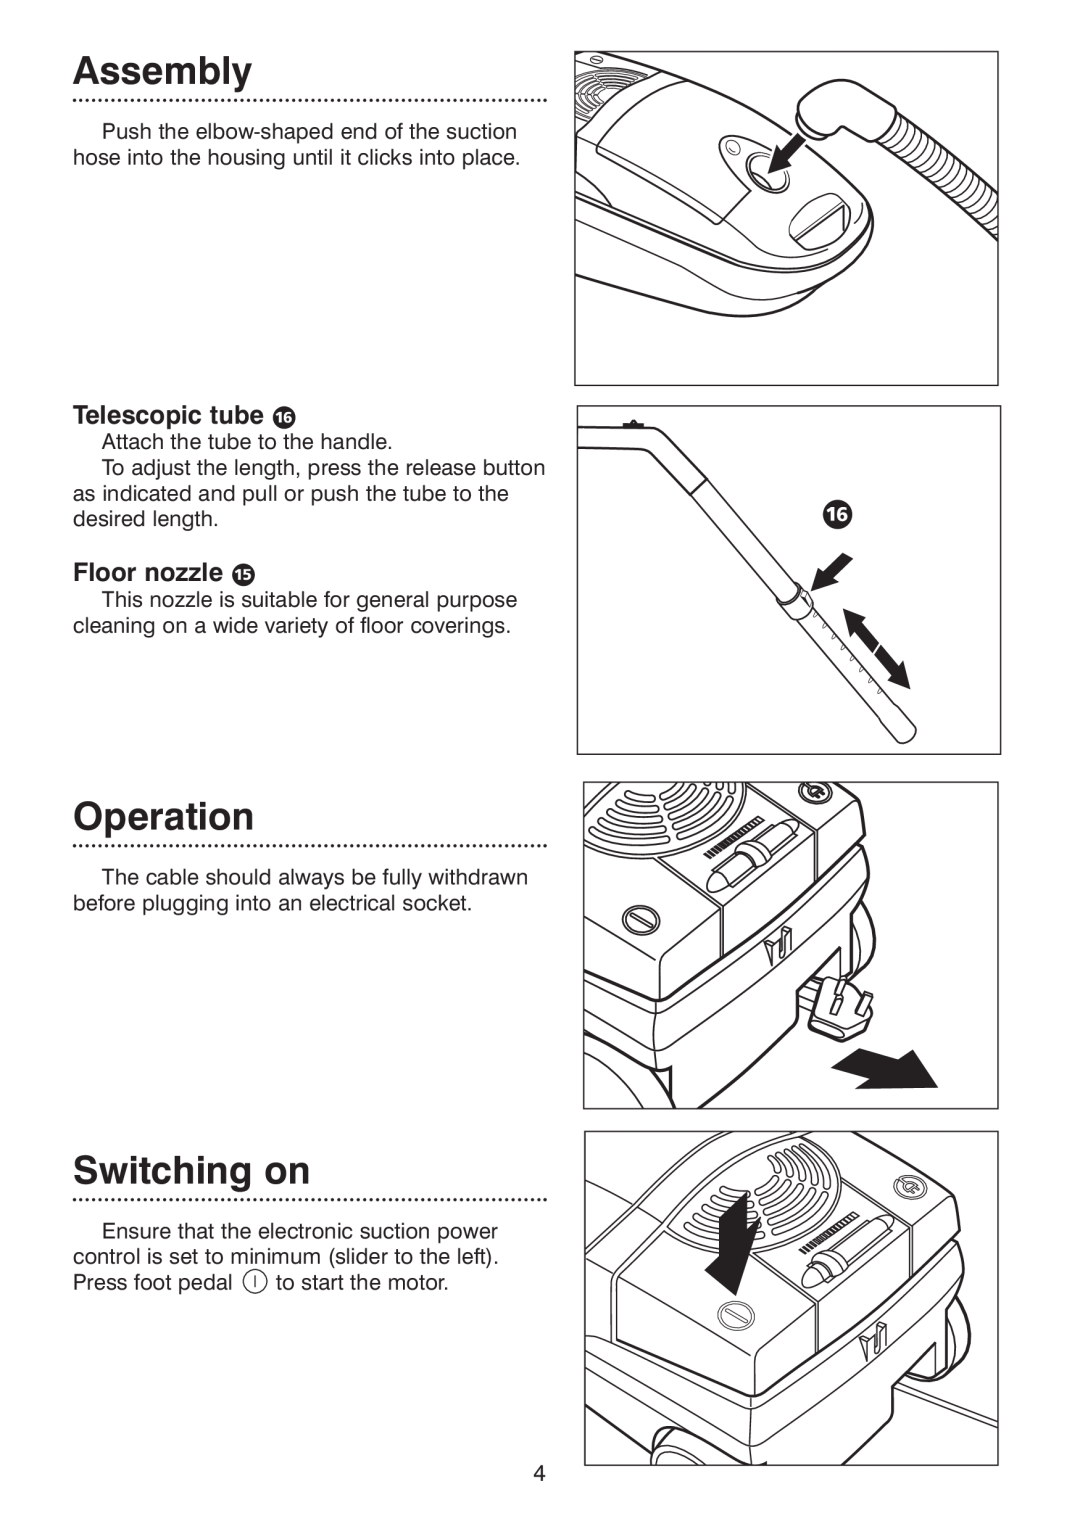 Morphy Richards Vacuum Cleaner manual Assembly, Operation, Switching on, Telescopic tube È, Floor nozzle Ë 